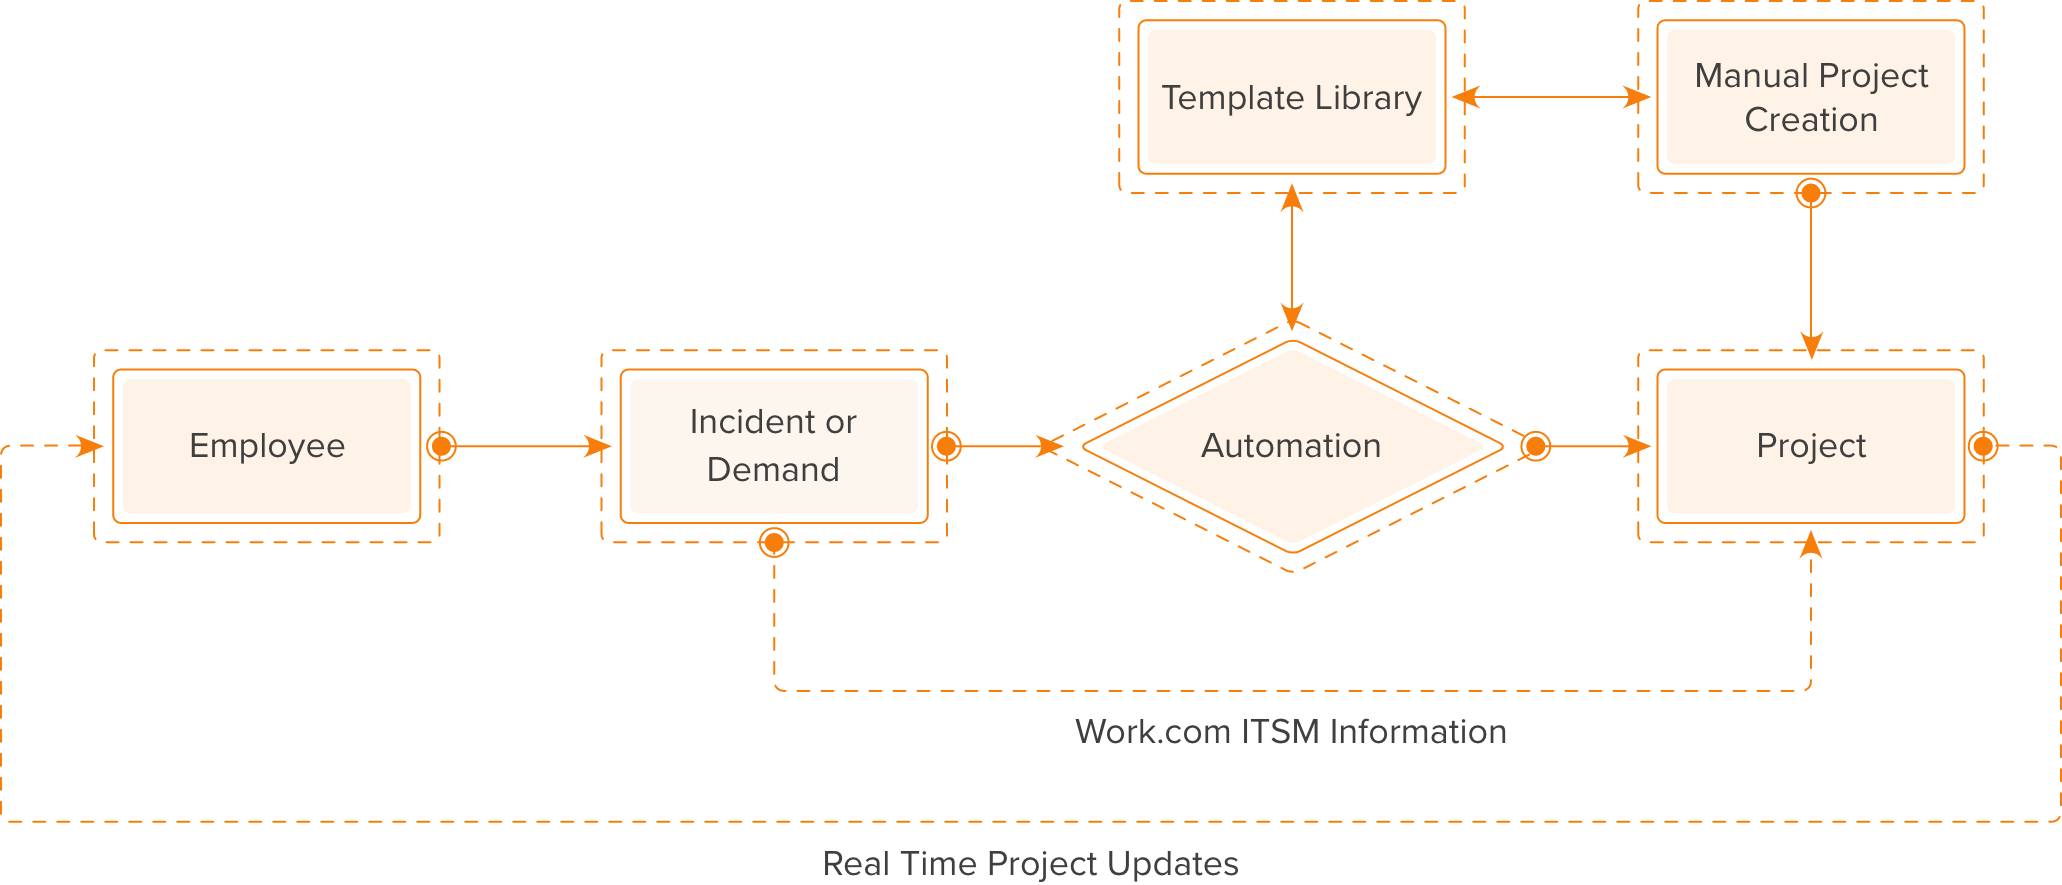 Create Projects from your Incidents & ITSM/C records